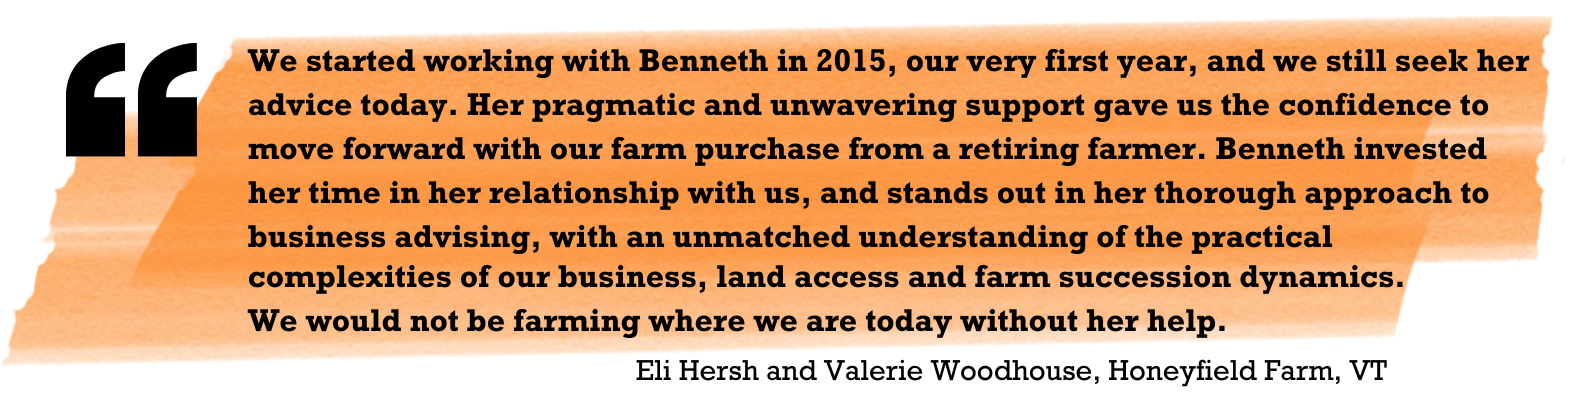 "We started working with Benneth in 2015, our very first year, and we still seek her advice today. Her pragmatic and unwavering support gave us the confidence to move forward with our farm purchase from a retiring farmer. Benneth invested her time in her relationship with us and stands out in her thorough approach to business advising, with an unmatched understanding of the practical complexities of our business, land access and farm succession dynamics. We would not be farming where we are today without her help." Eli Hersh and Valerie Woodhouse, Honeyfield Farm, VT 